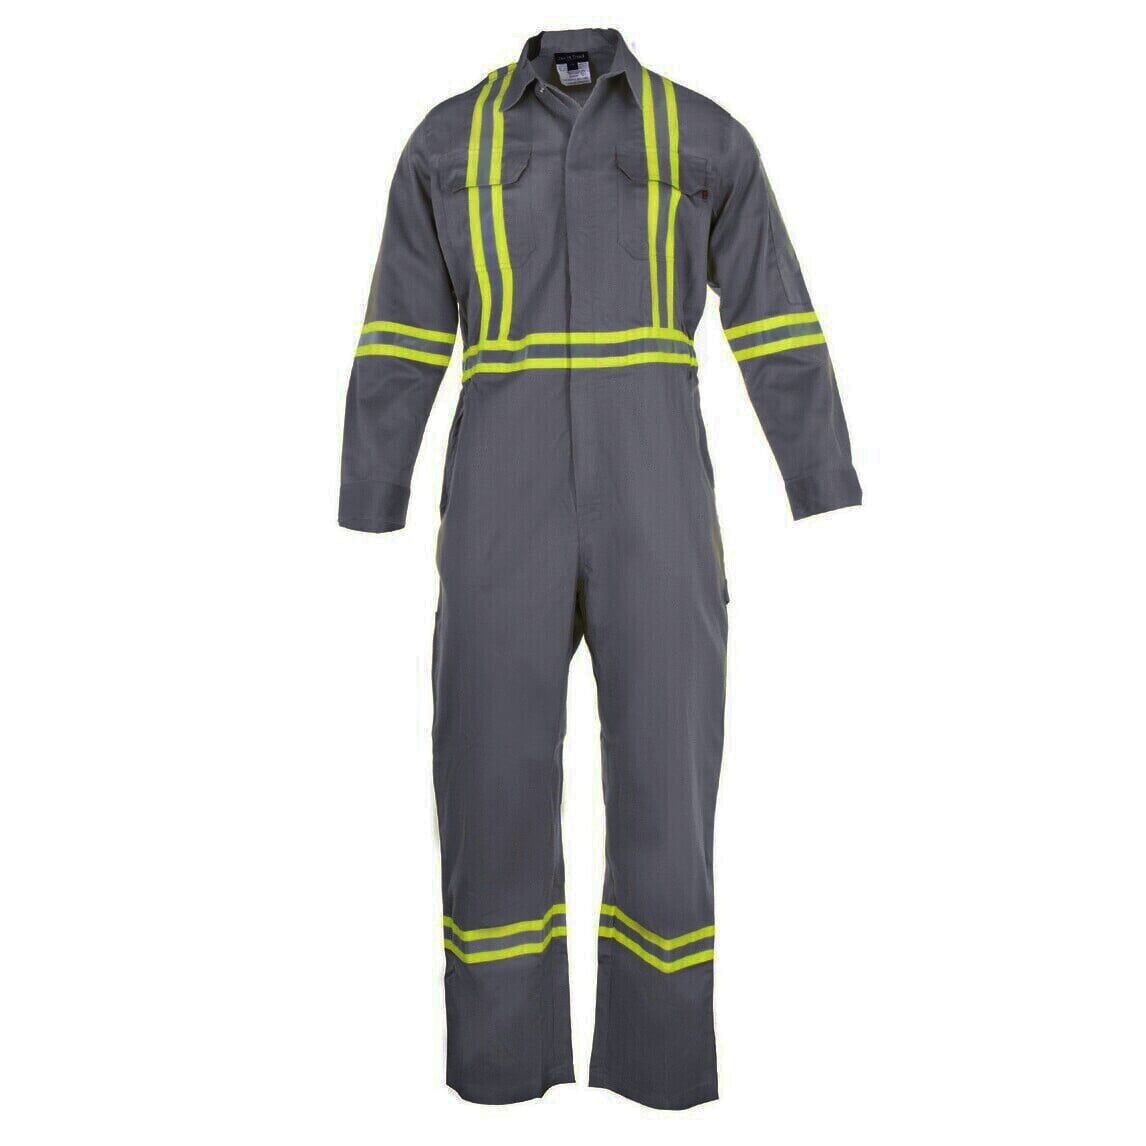 Green Flame Fire Retardant Resistant High Vis Hooded Boilersuit Coverall Overall 